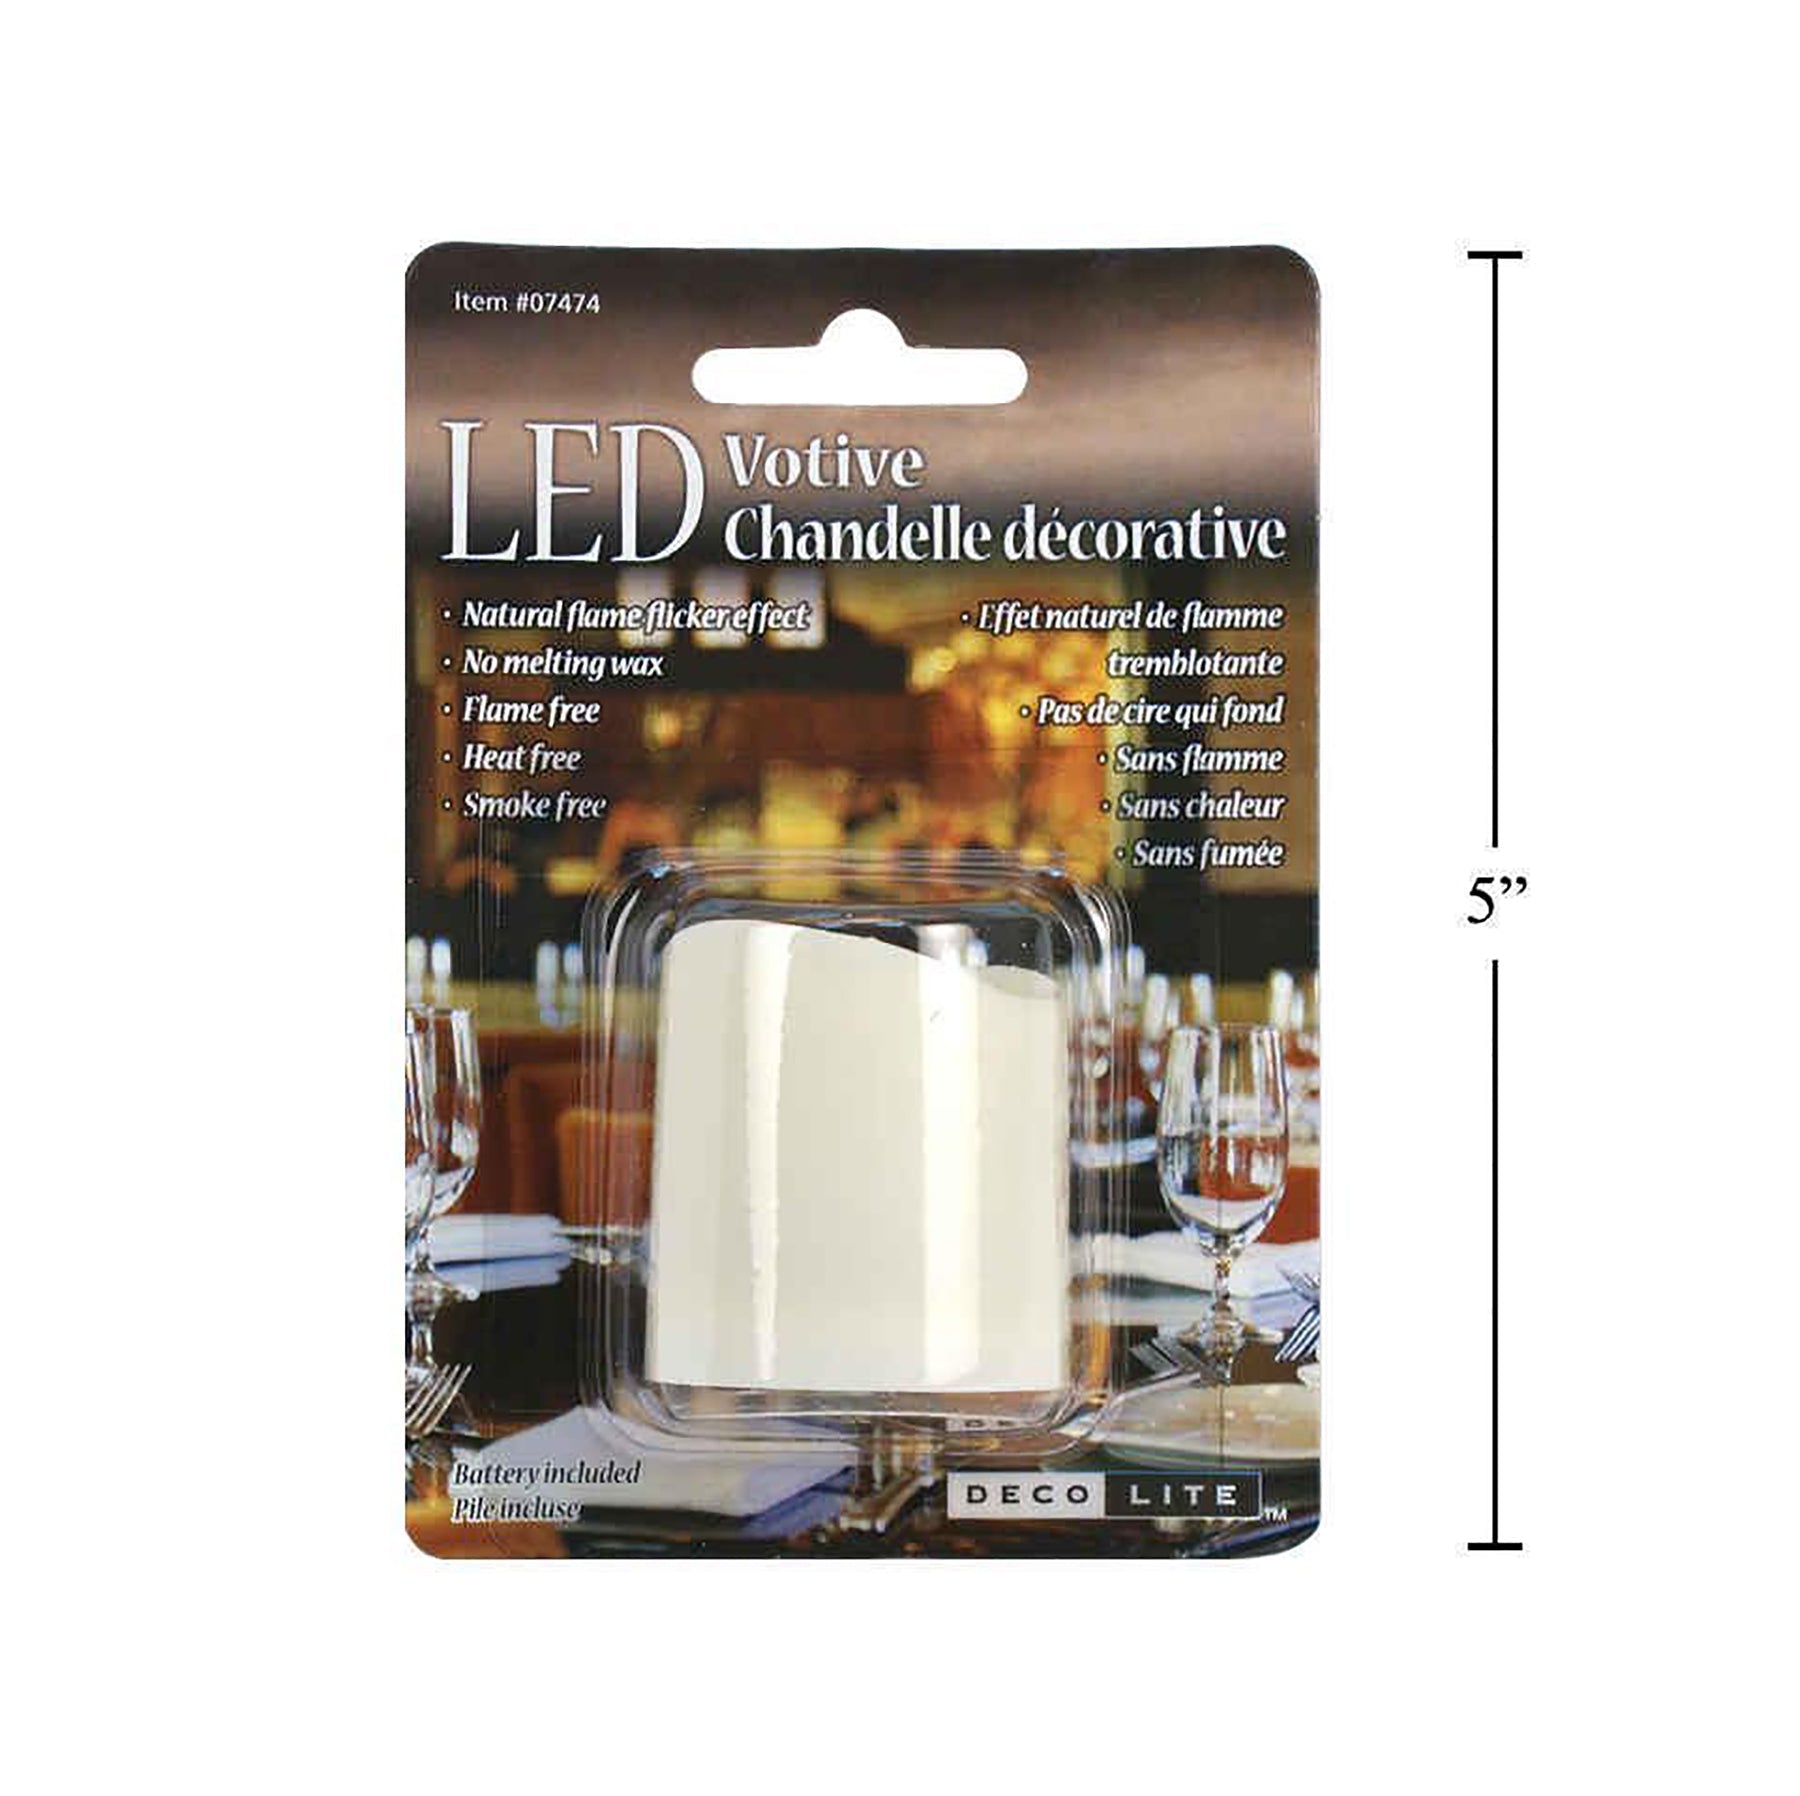 Deco Lite LED Decorative Candle White Flickering Light Battery Included 1.5x1.5in